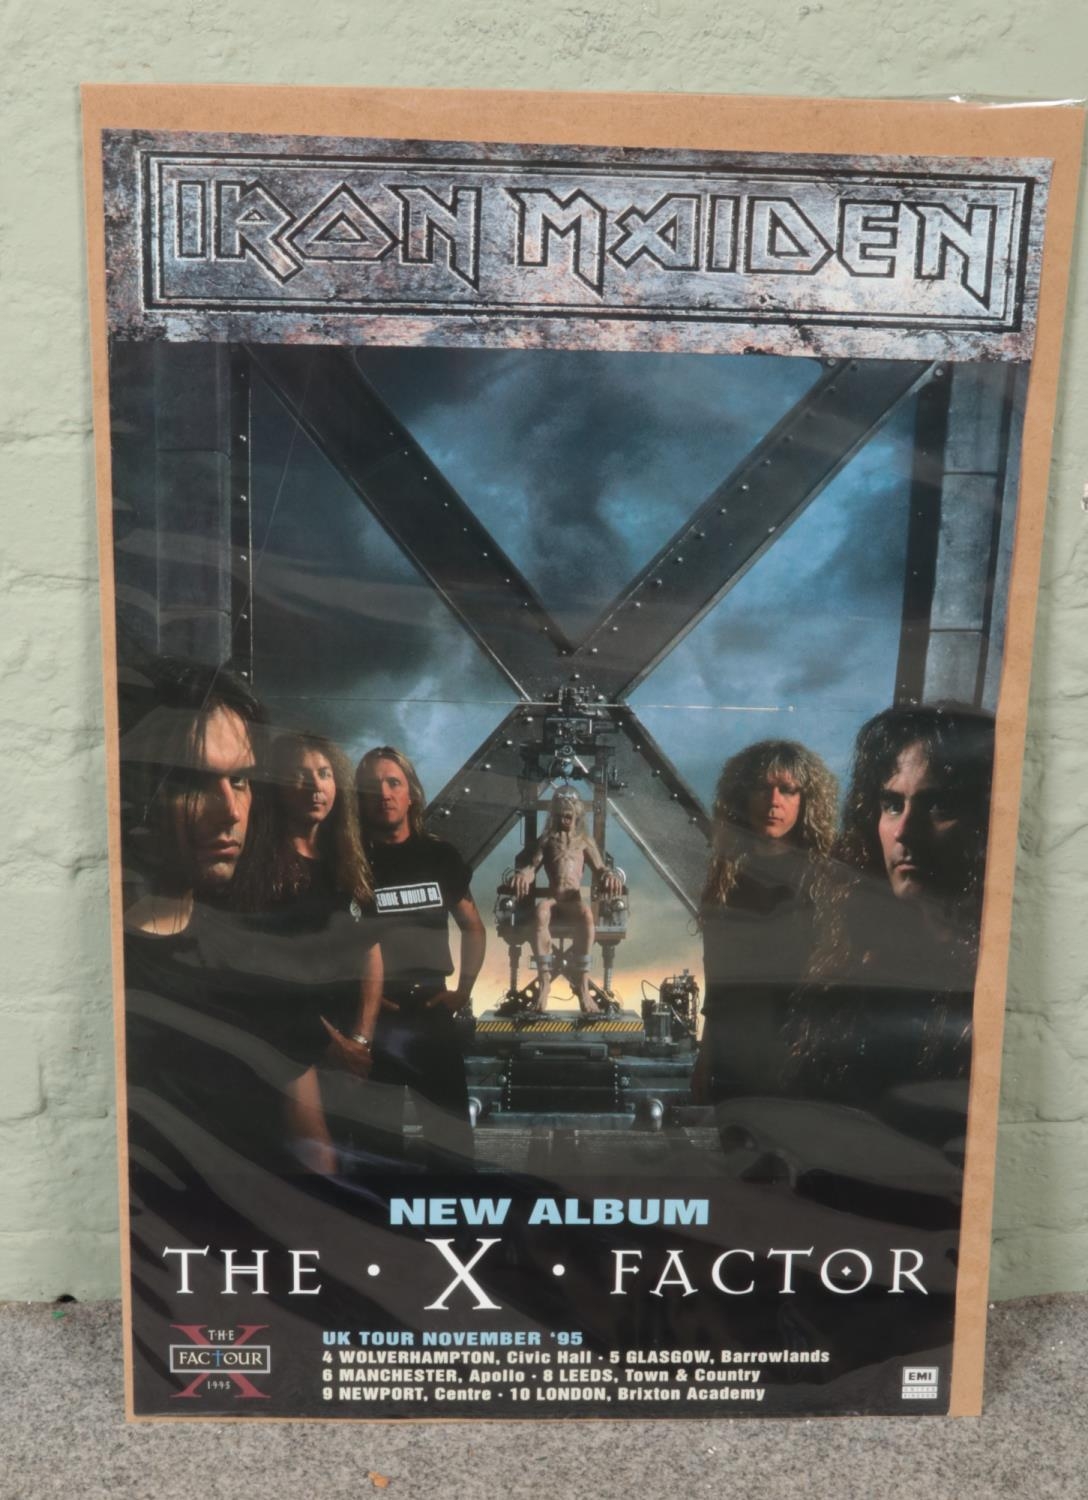 An Iron Maiden promotional poster. New Album The X Factor. (79cm x 53cm)